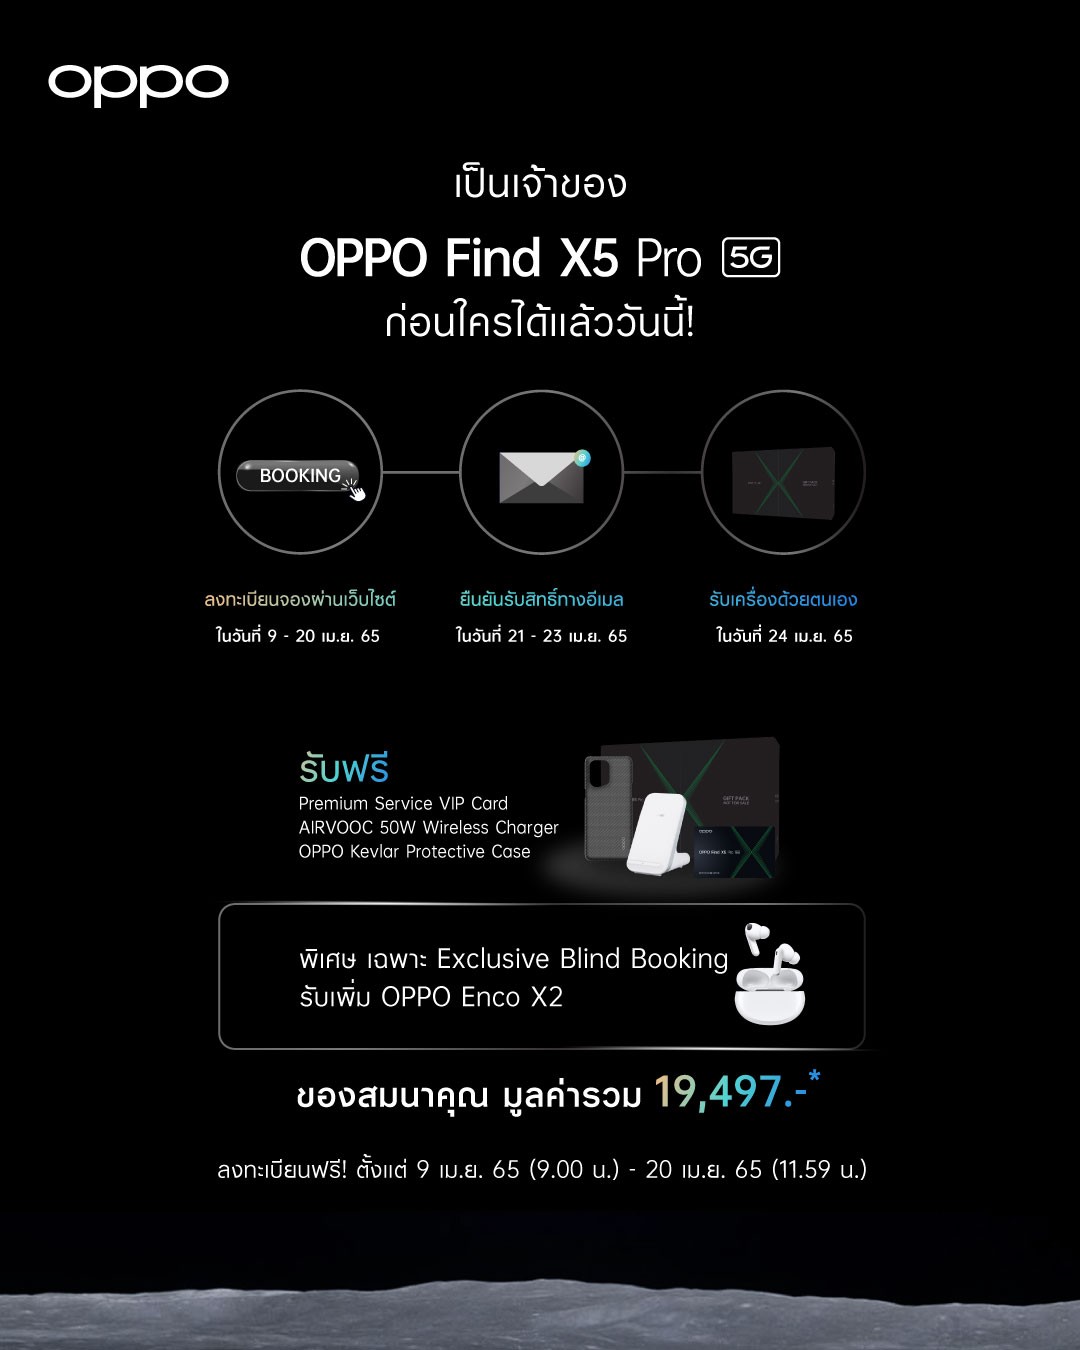 OPPO-Find-X5-Pro-5G Blind-Booking1